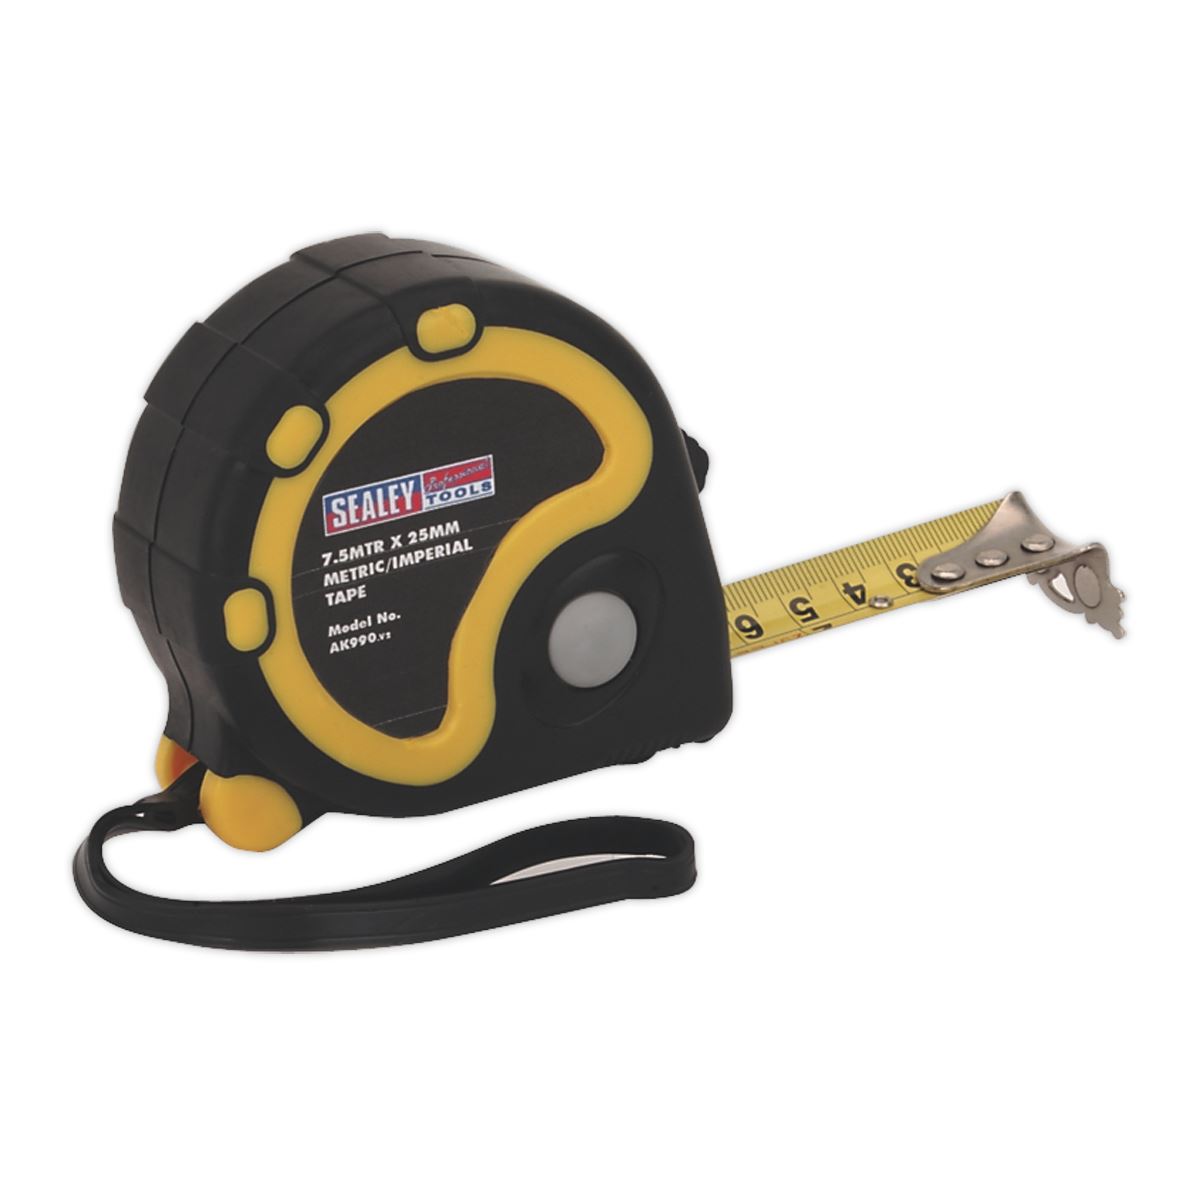 Sealey Rubber Tape Measure 7.5m(25ft) x 25mm Metric/Imperial